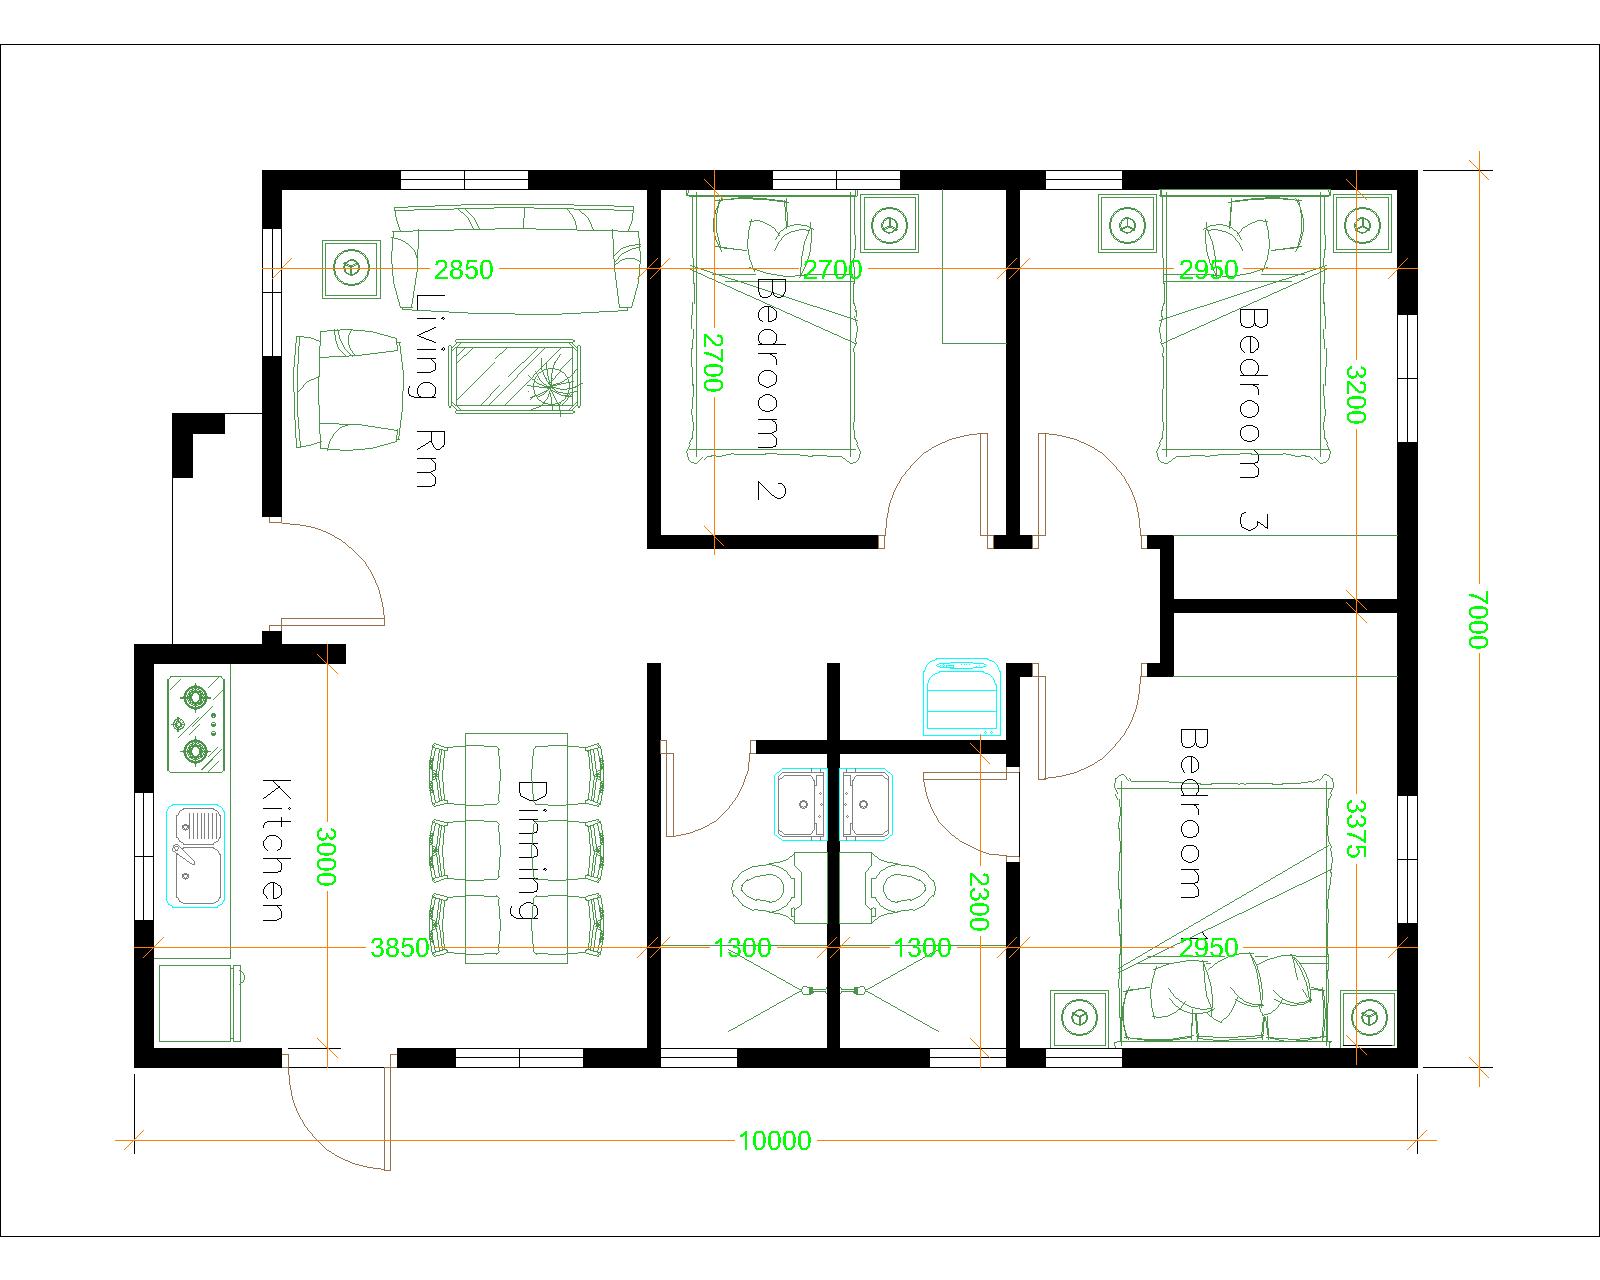 House design 7x10 with 3 Bedrooms Hip roof layout plan